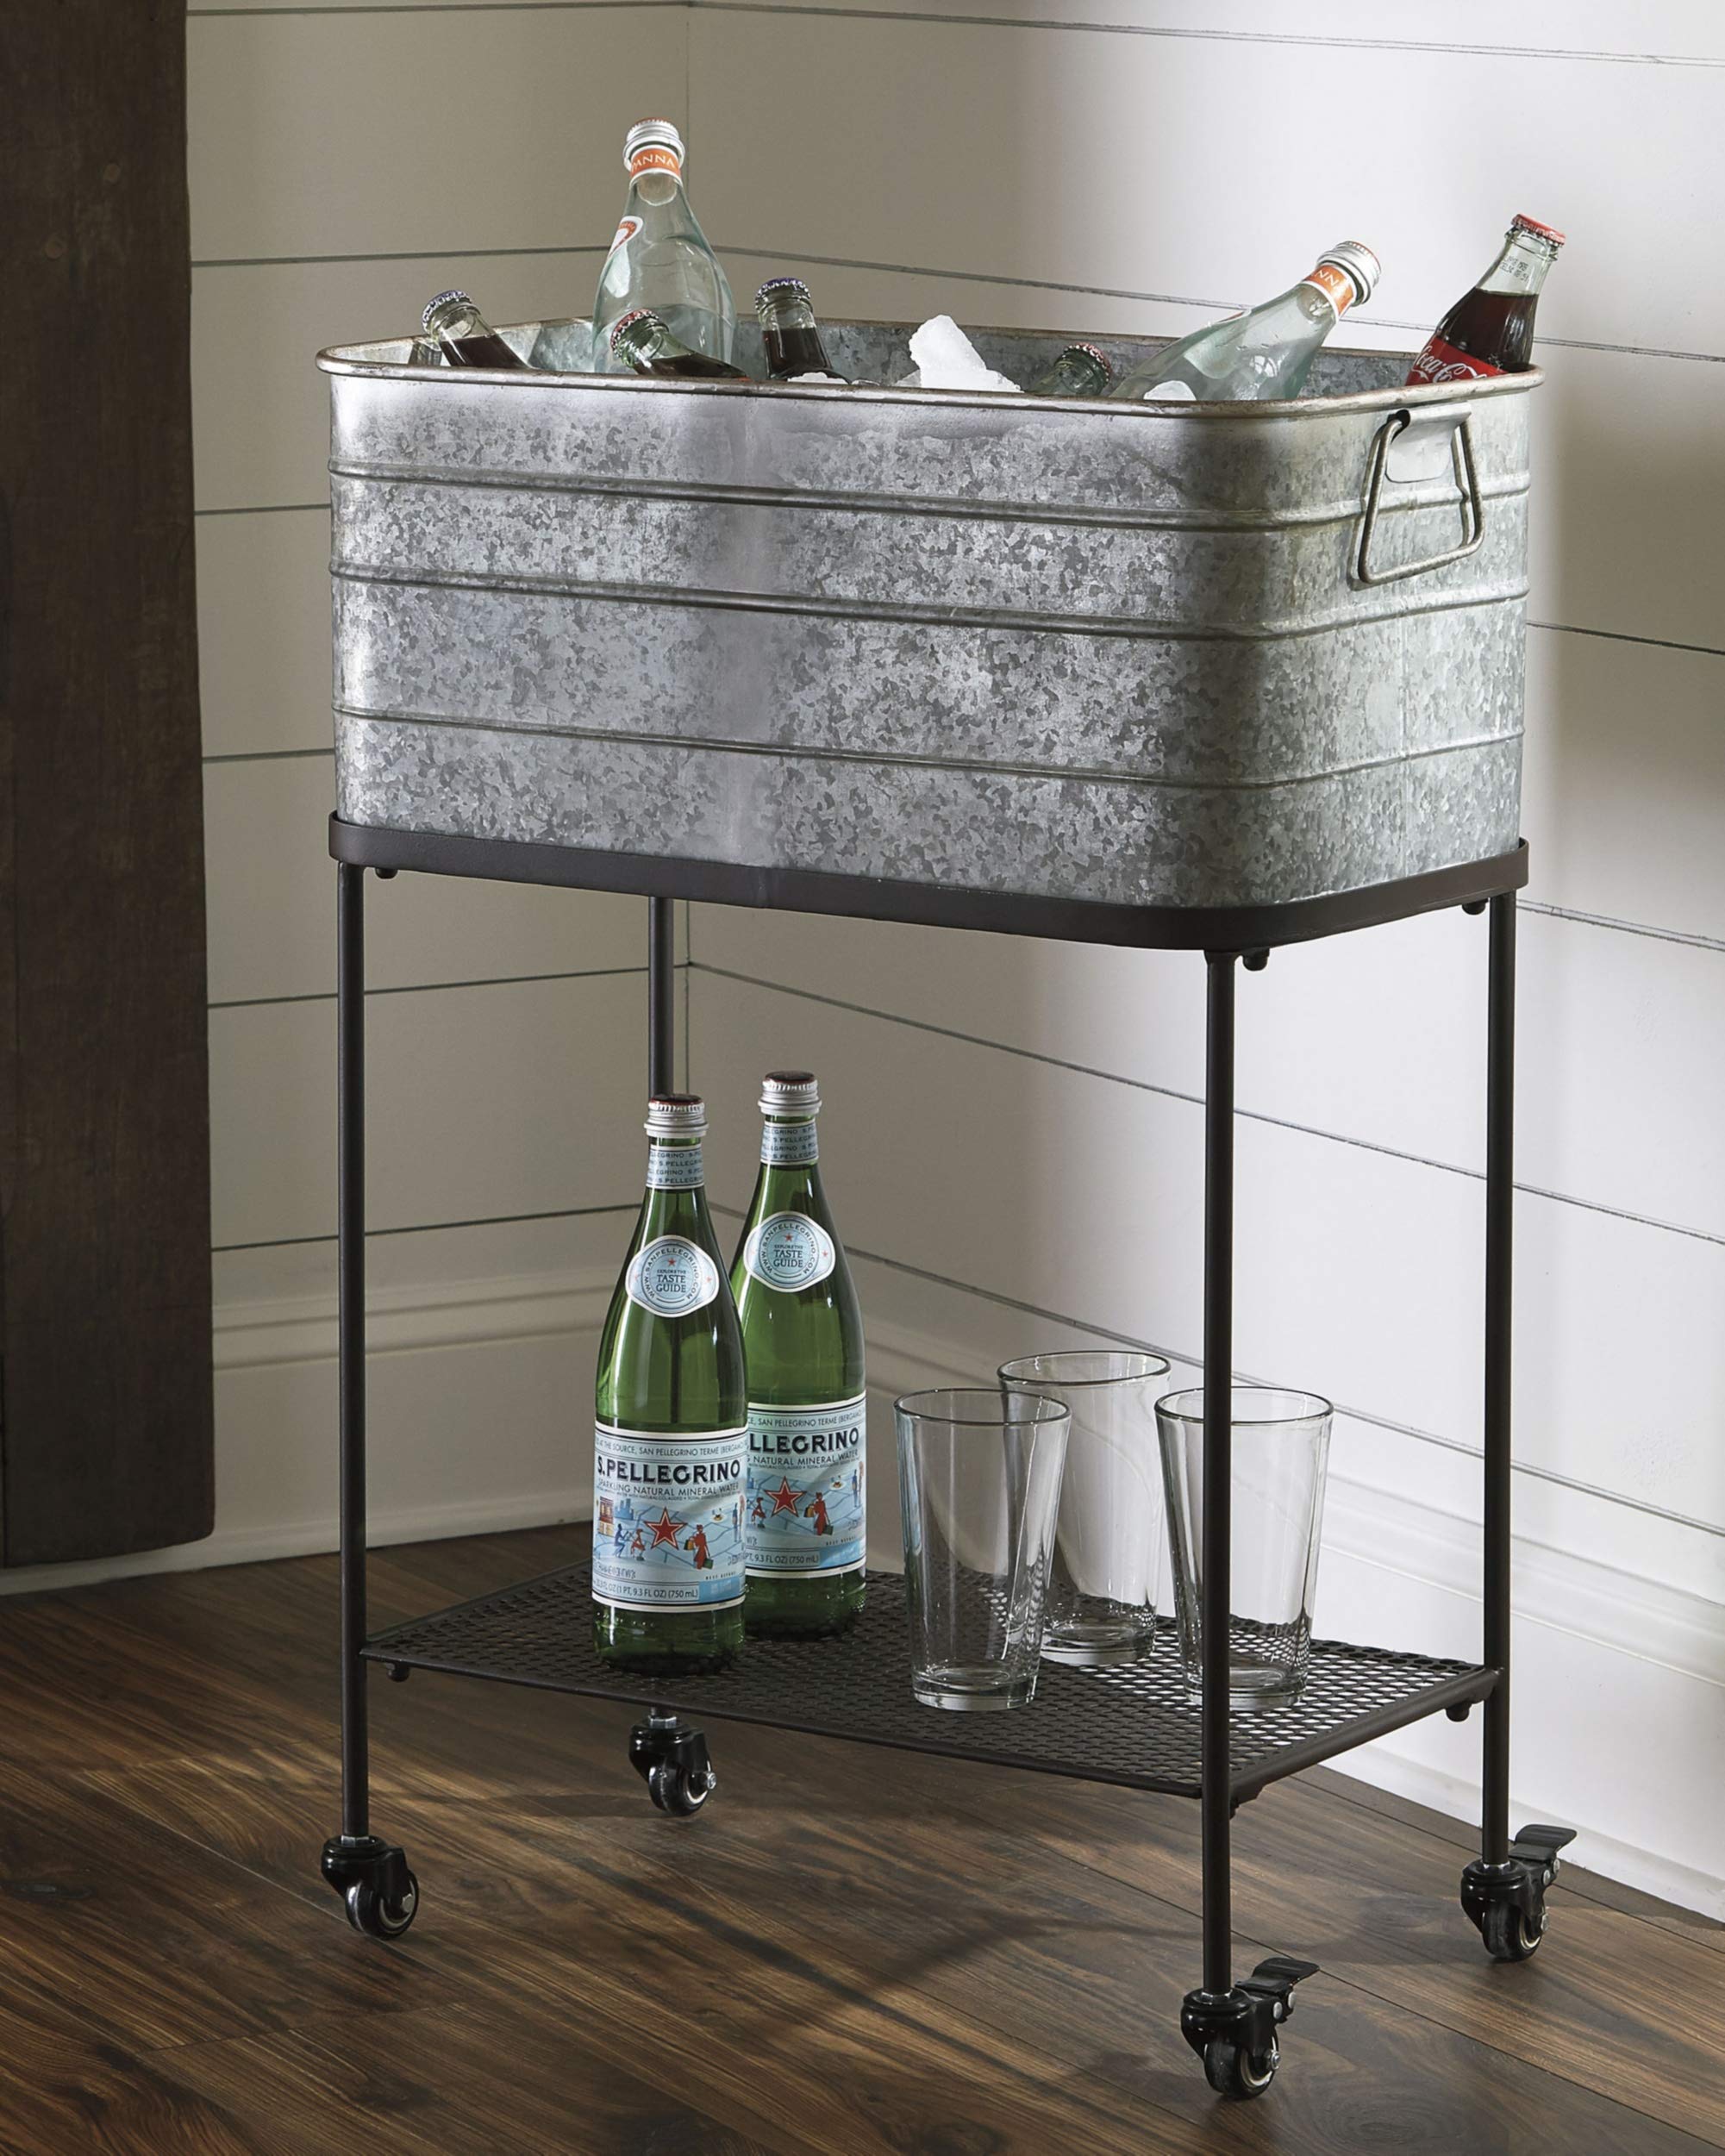 Signature Design by Ashley Vossman Galvanized Metal Beverage Tub with Caster Wheel Stand, Antique Gray